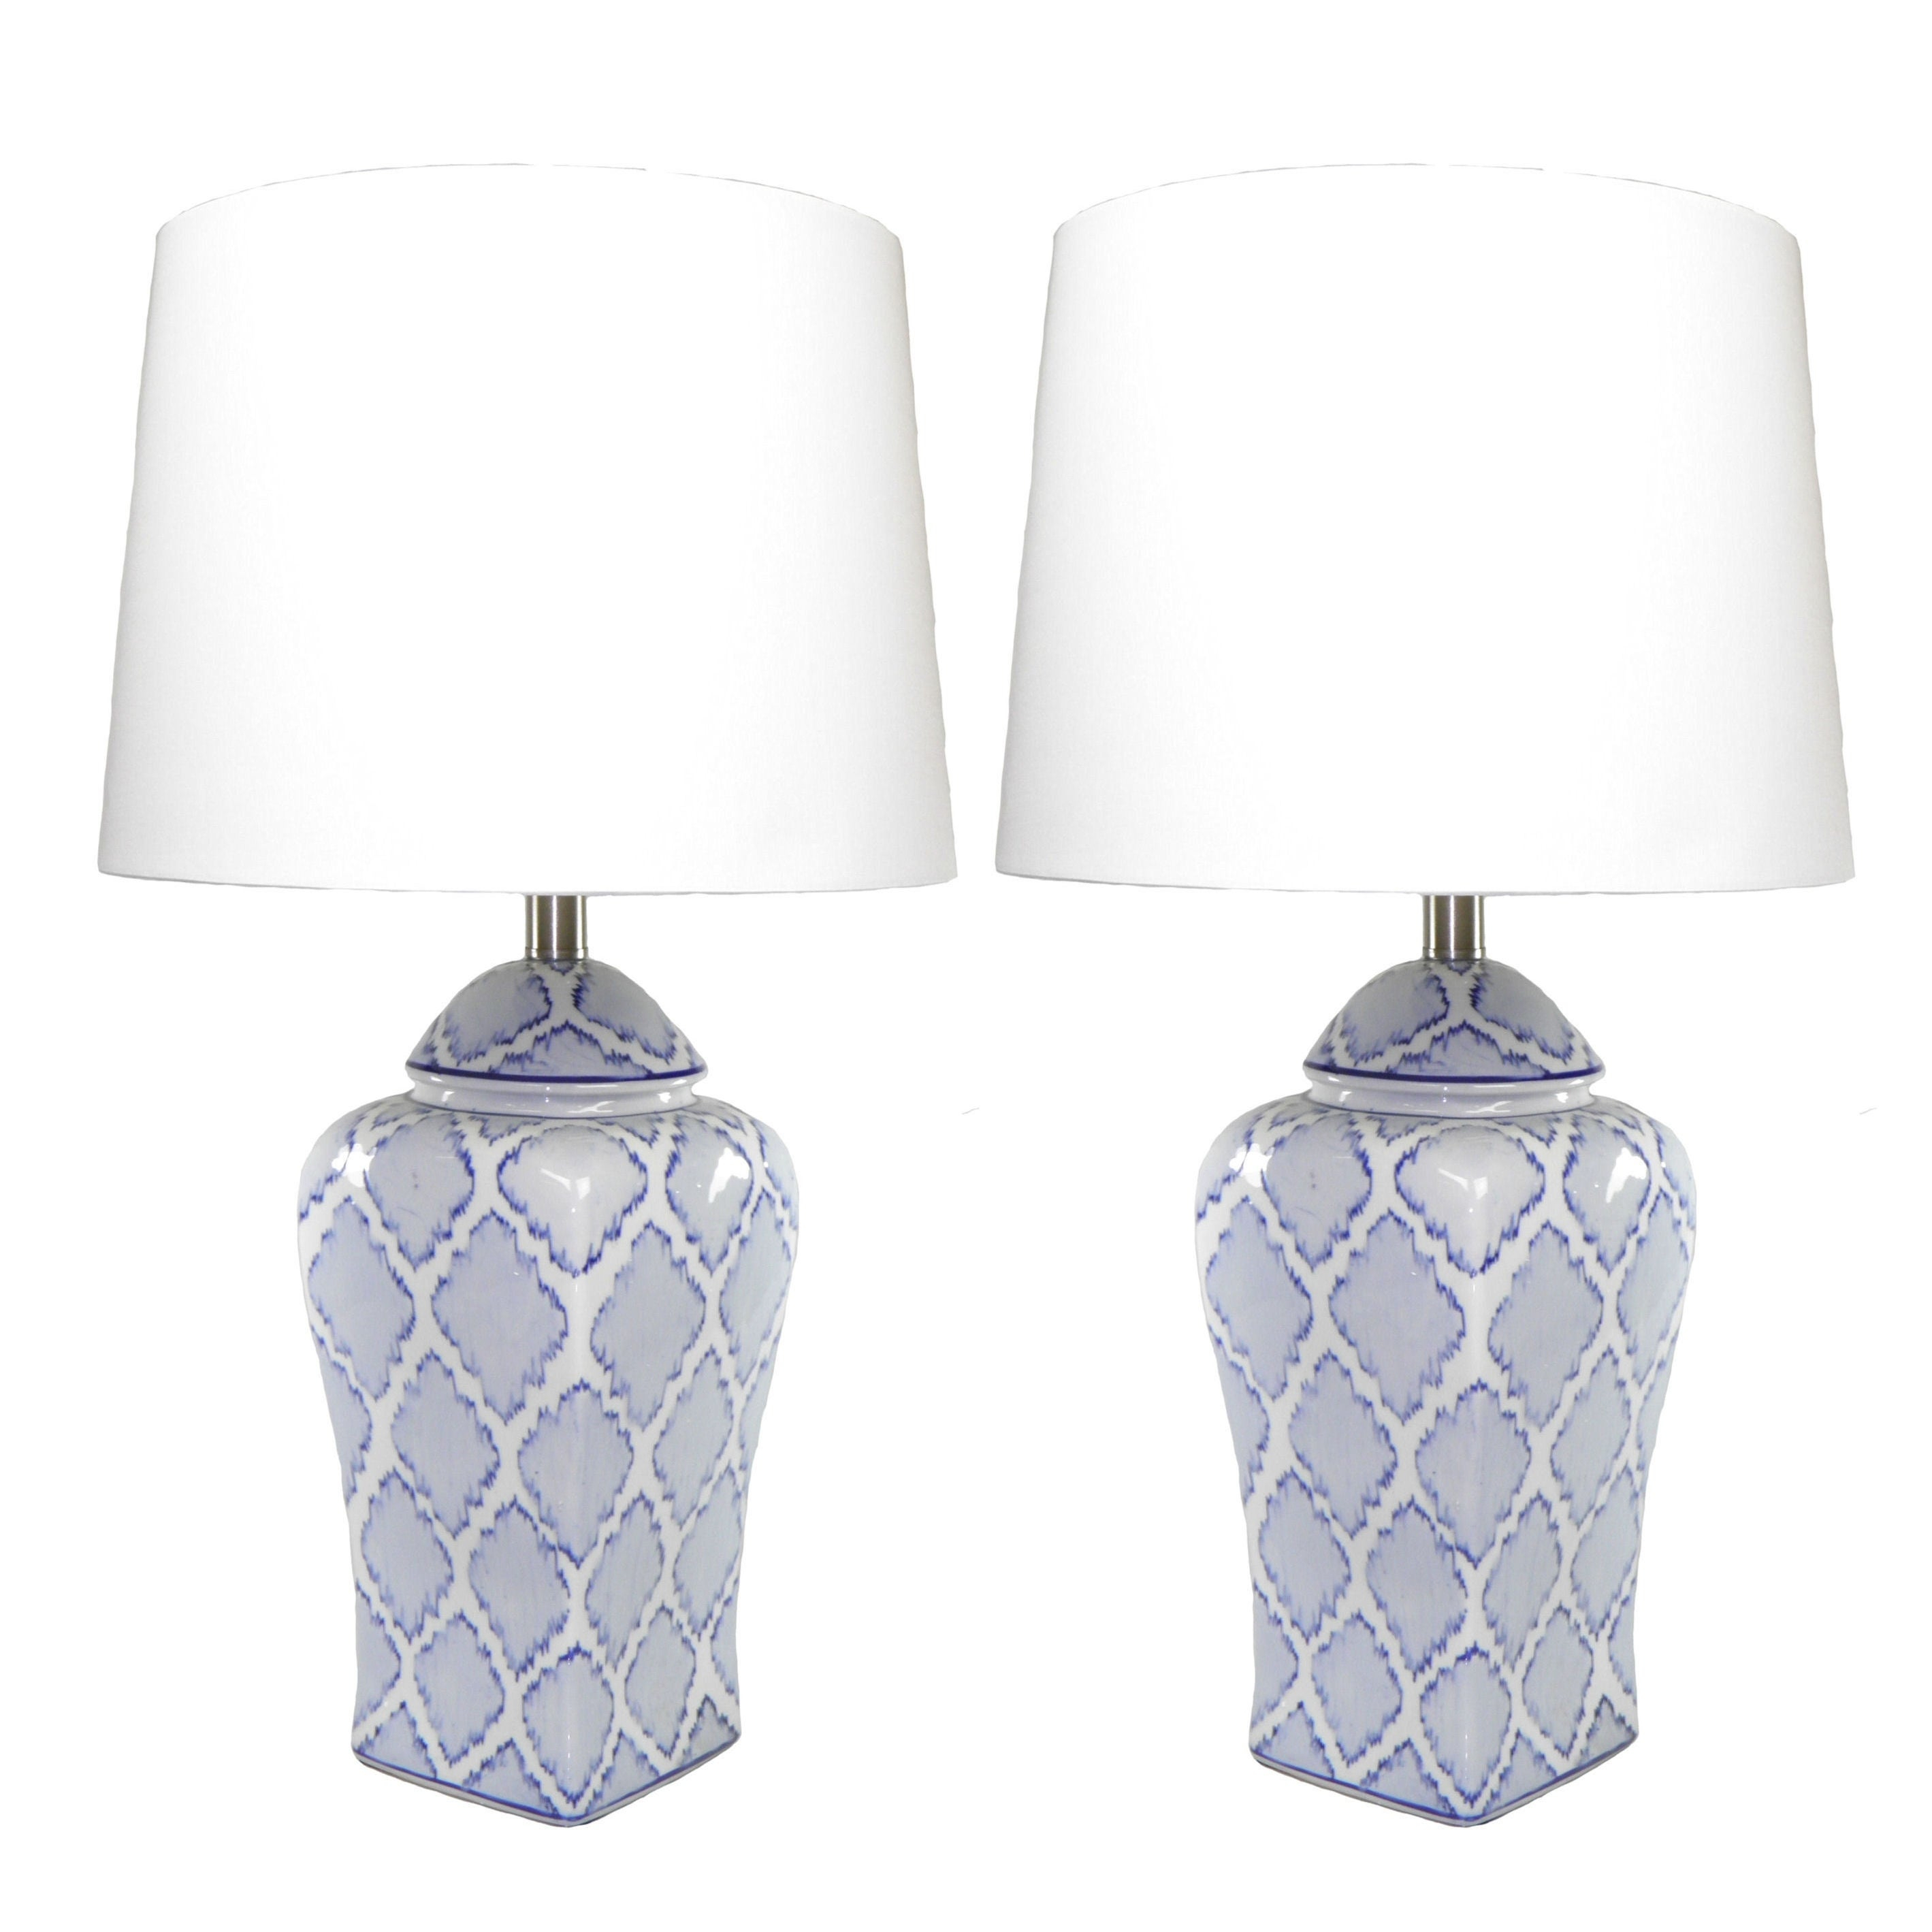 Jt Lighting Handpainted Ikat Diamond Table Lamps Set Of 2 within proportions 2838 X 2838